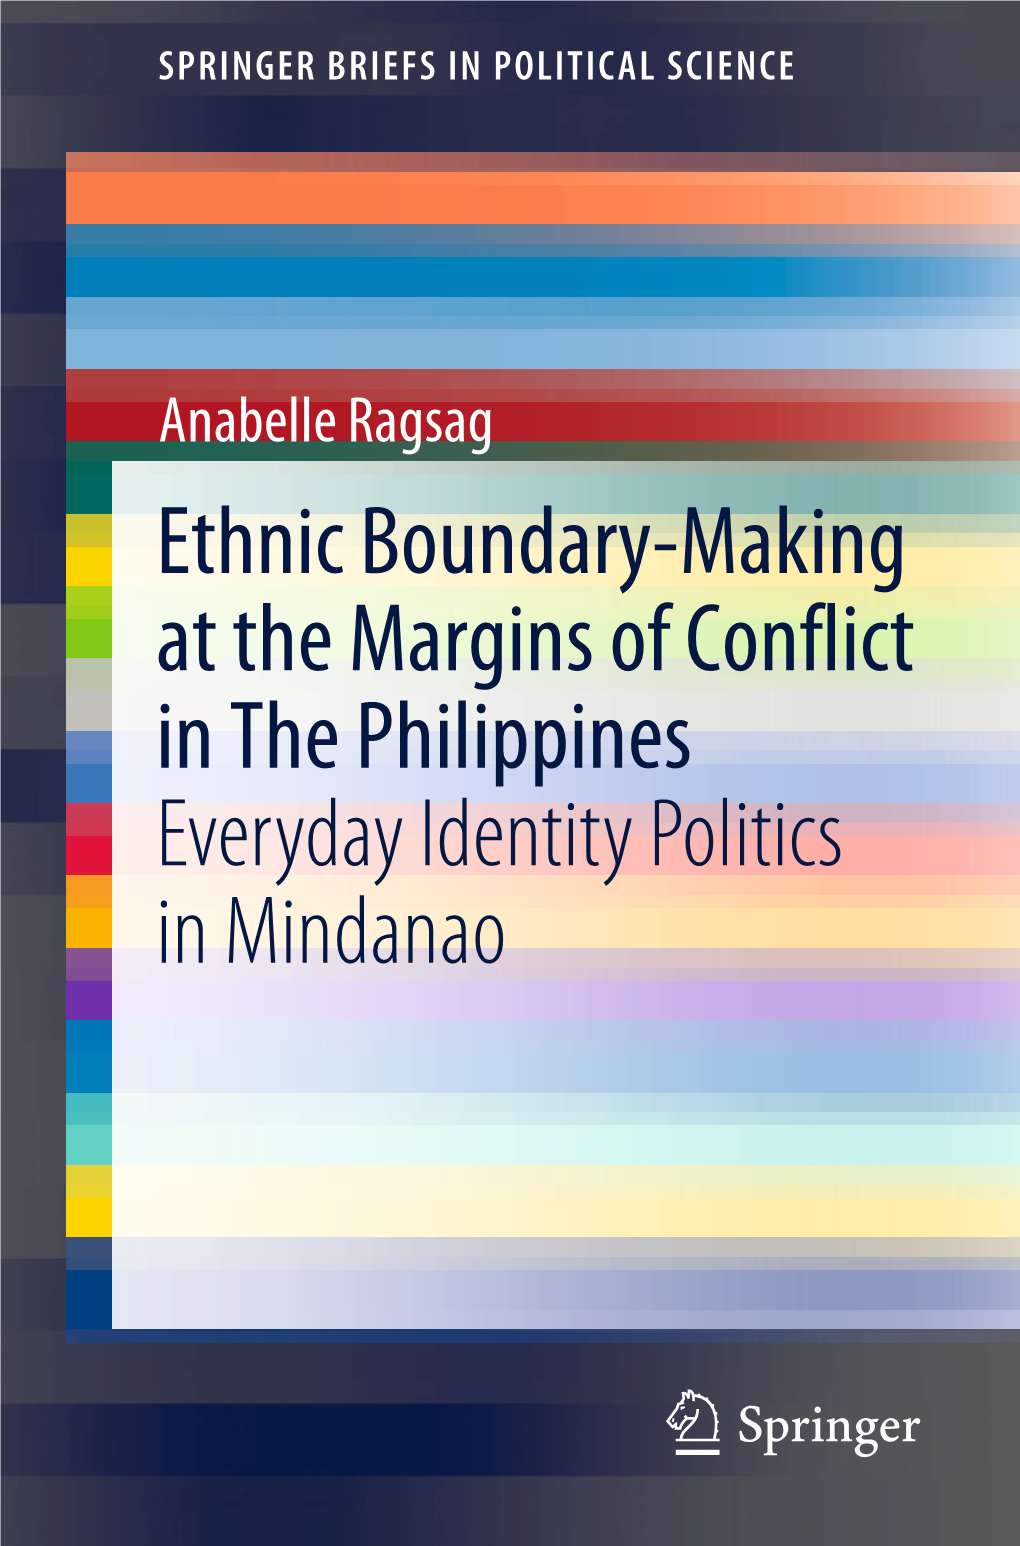 Ethnic Boundary-Making at the Margins of Conflict in the Philippines Everyday Identity Politics in Mindanao